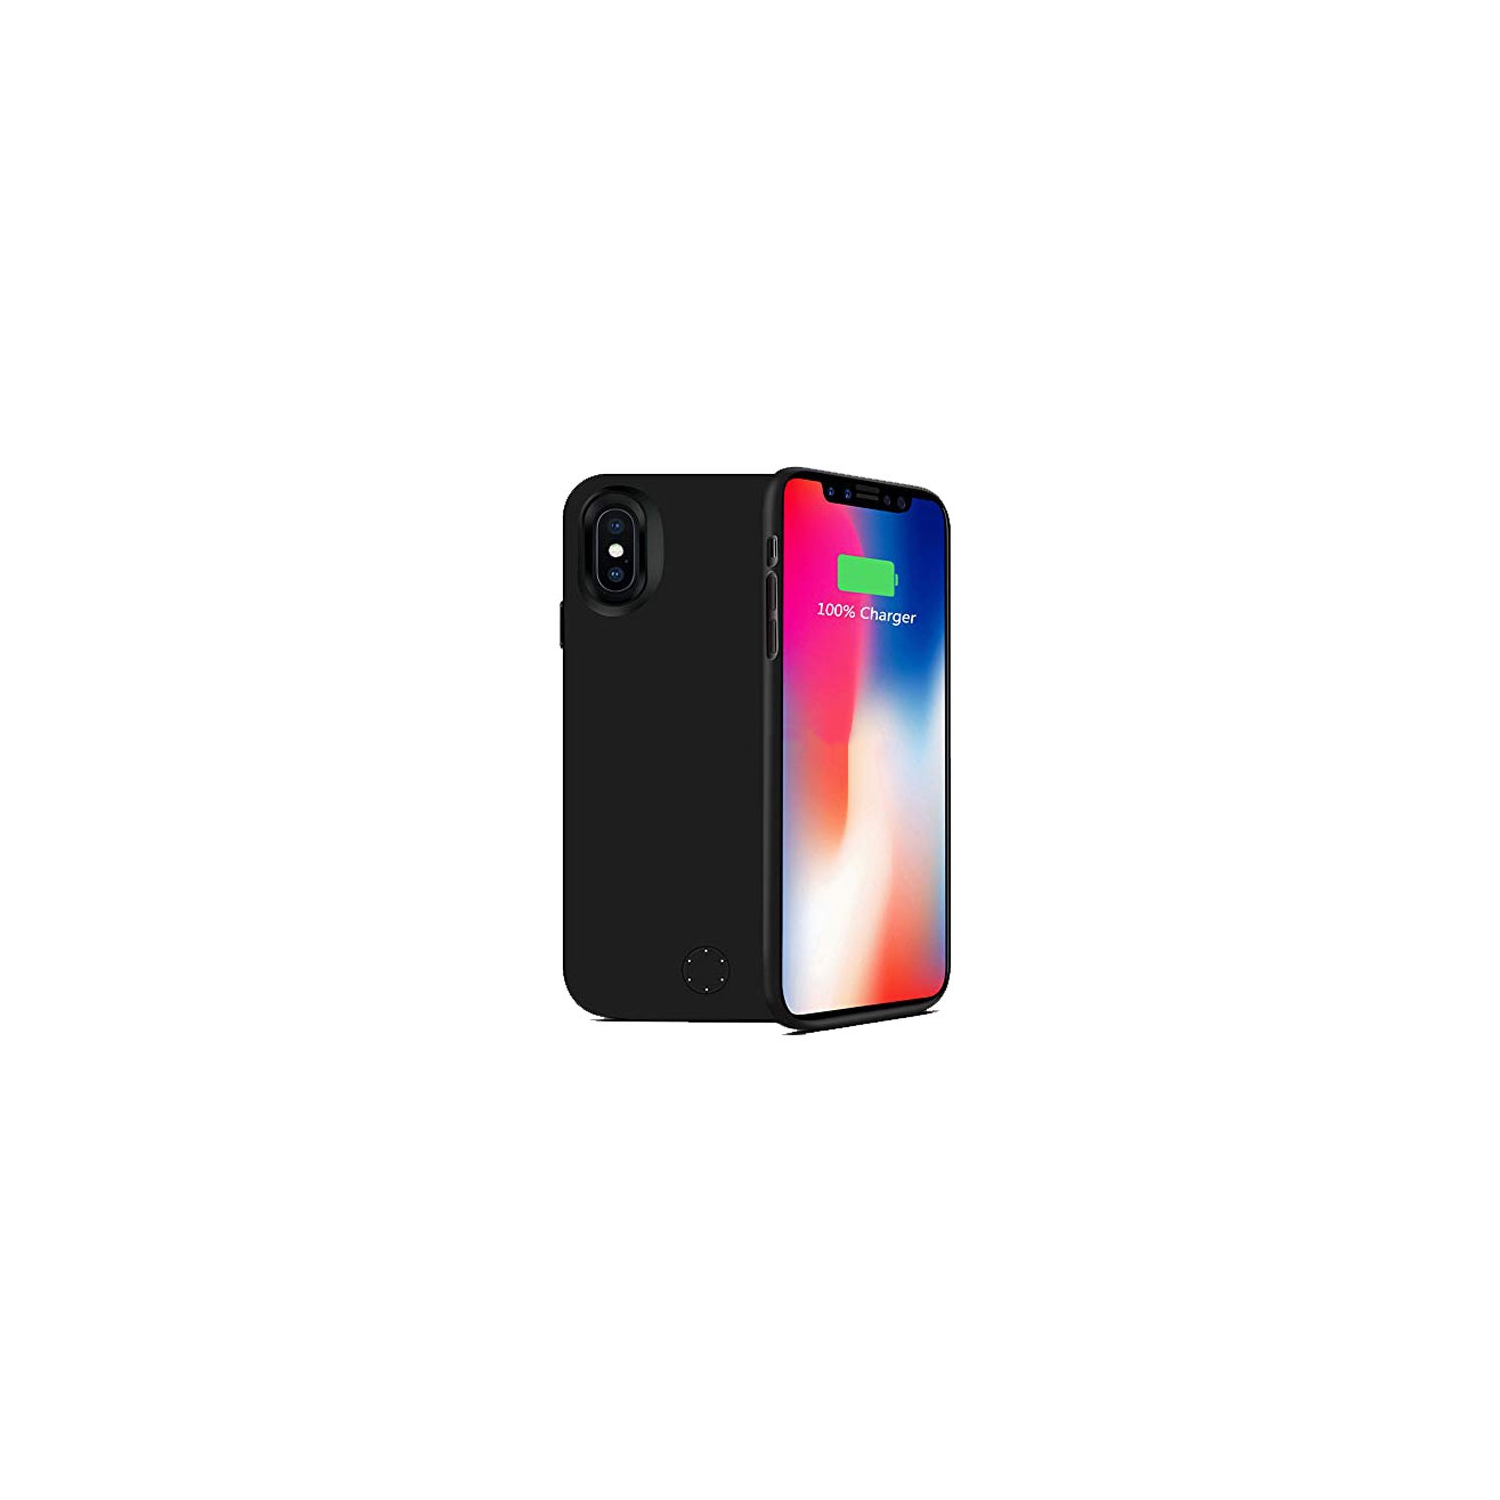 Rechargeable External Battery Charger Portable Power Bank Case for iPhone Xr (6.1"), 4000mAh, Black